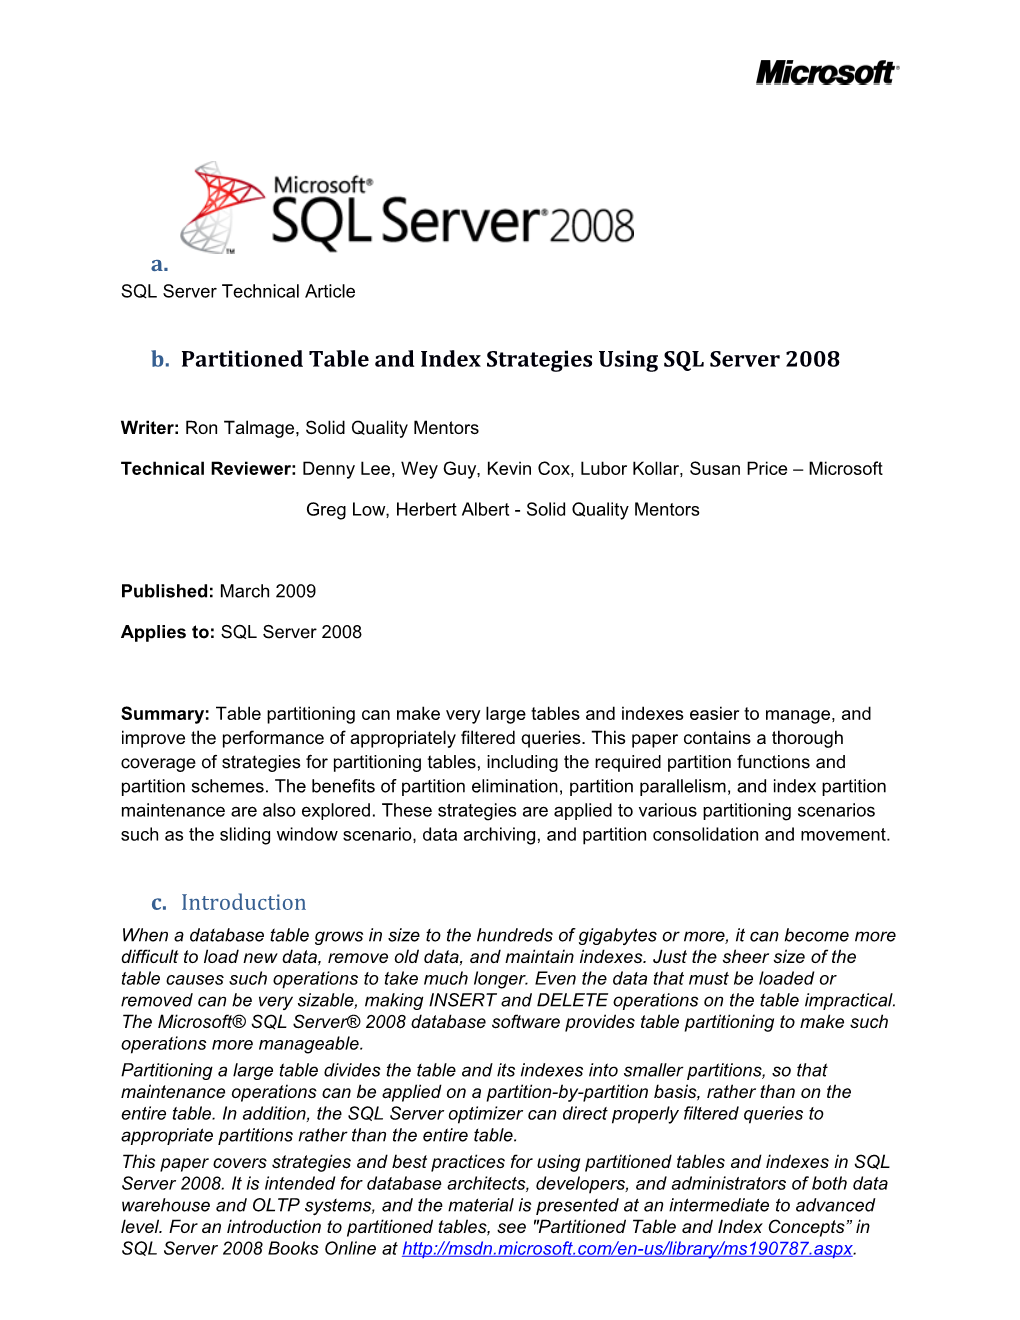 Partitioned Table and Index Strategies Using SQL Server 2008